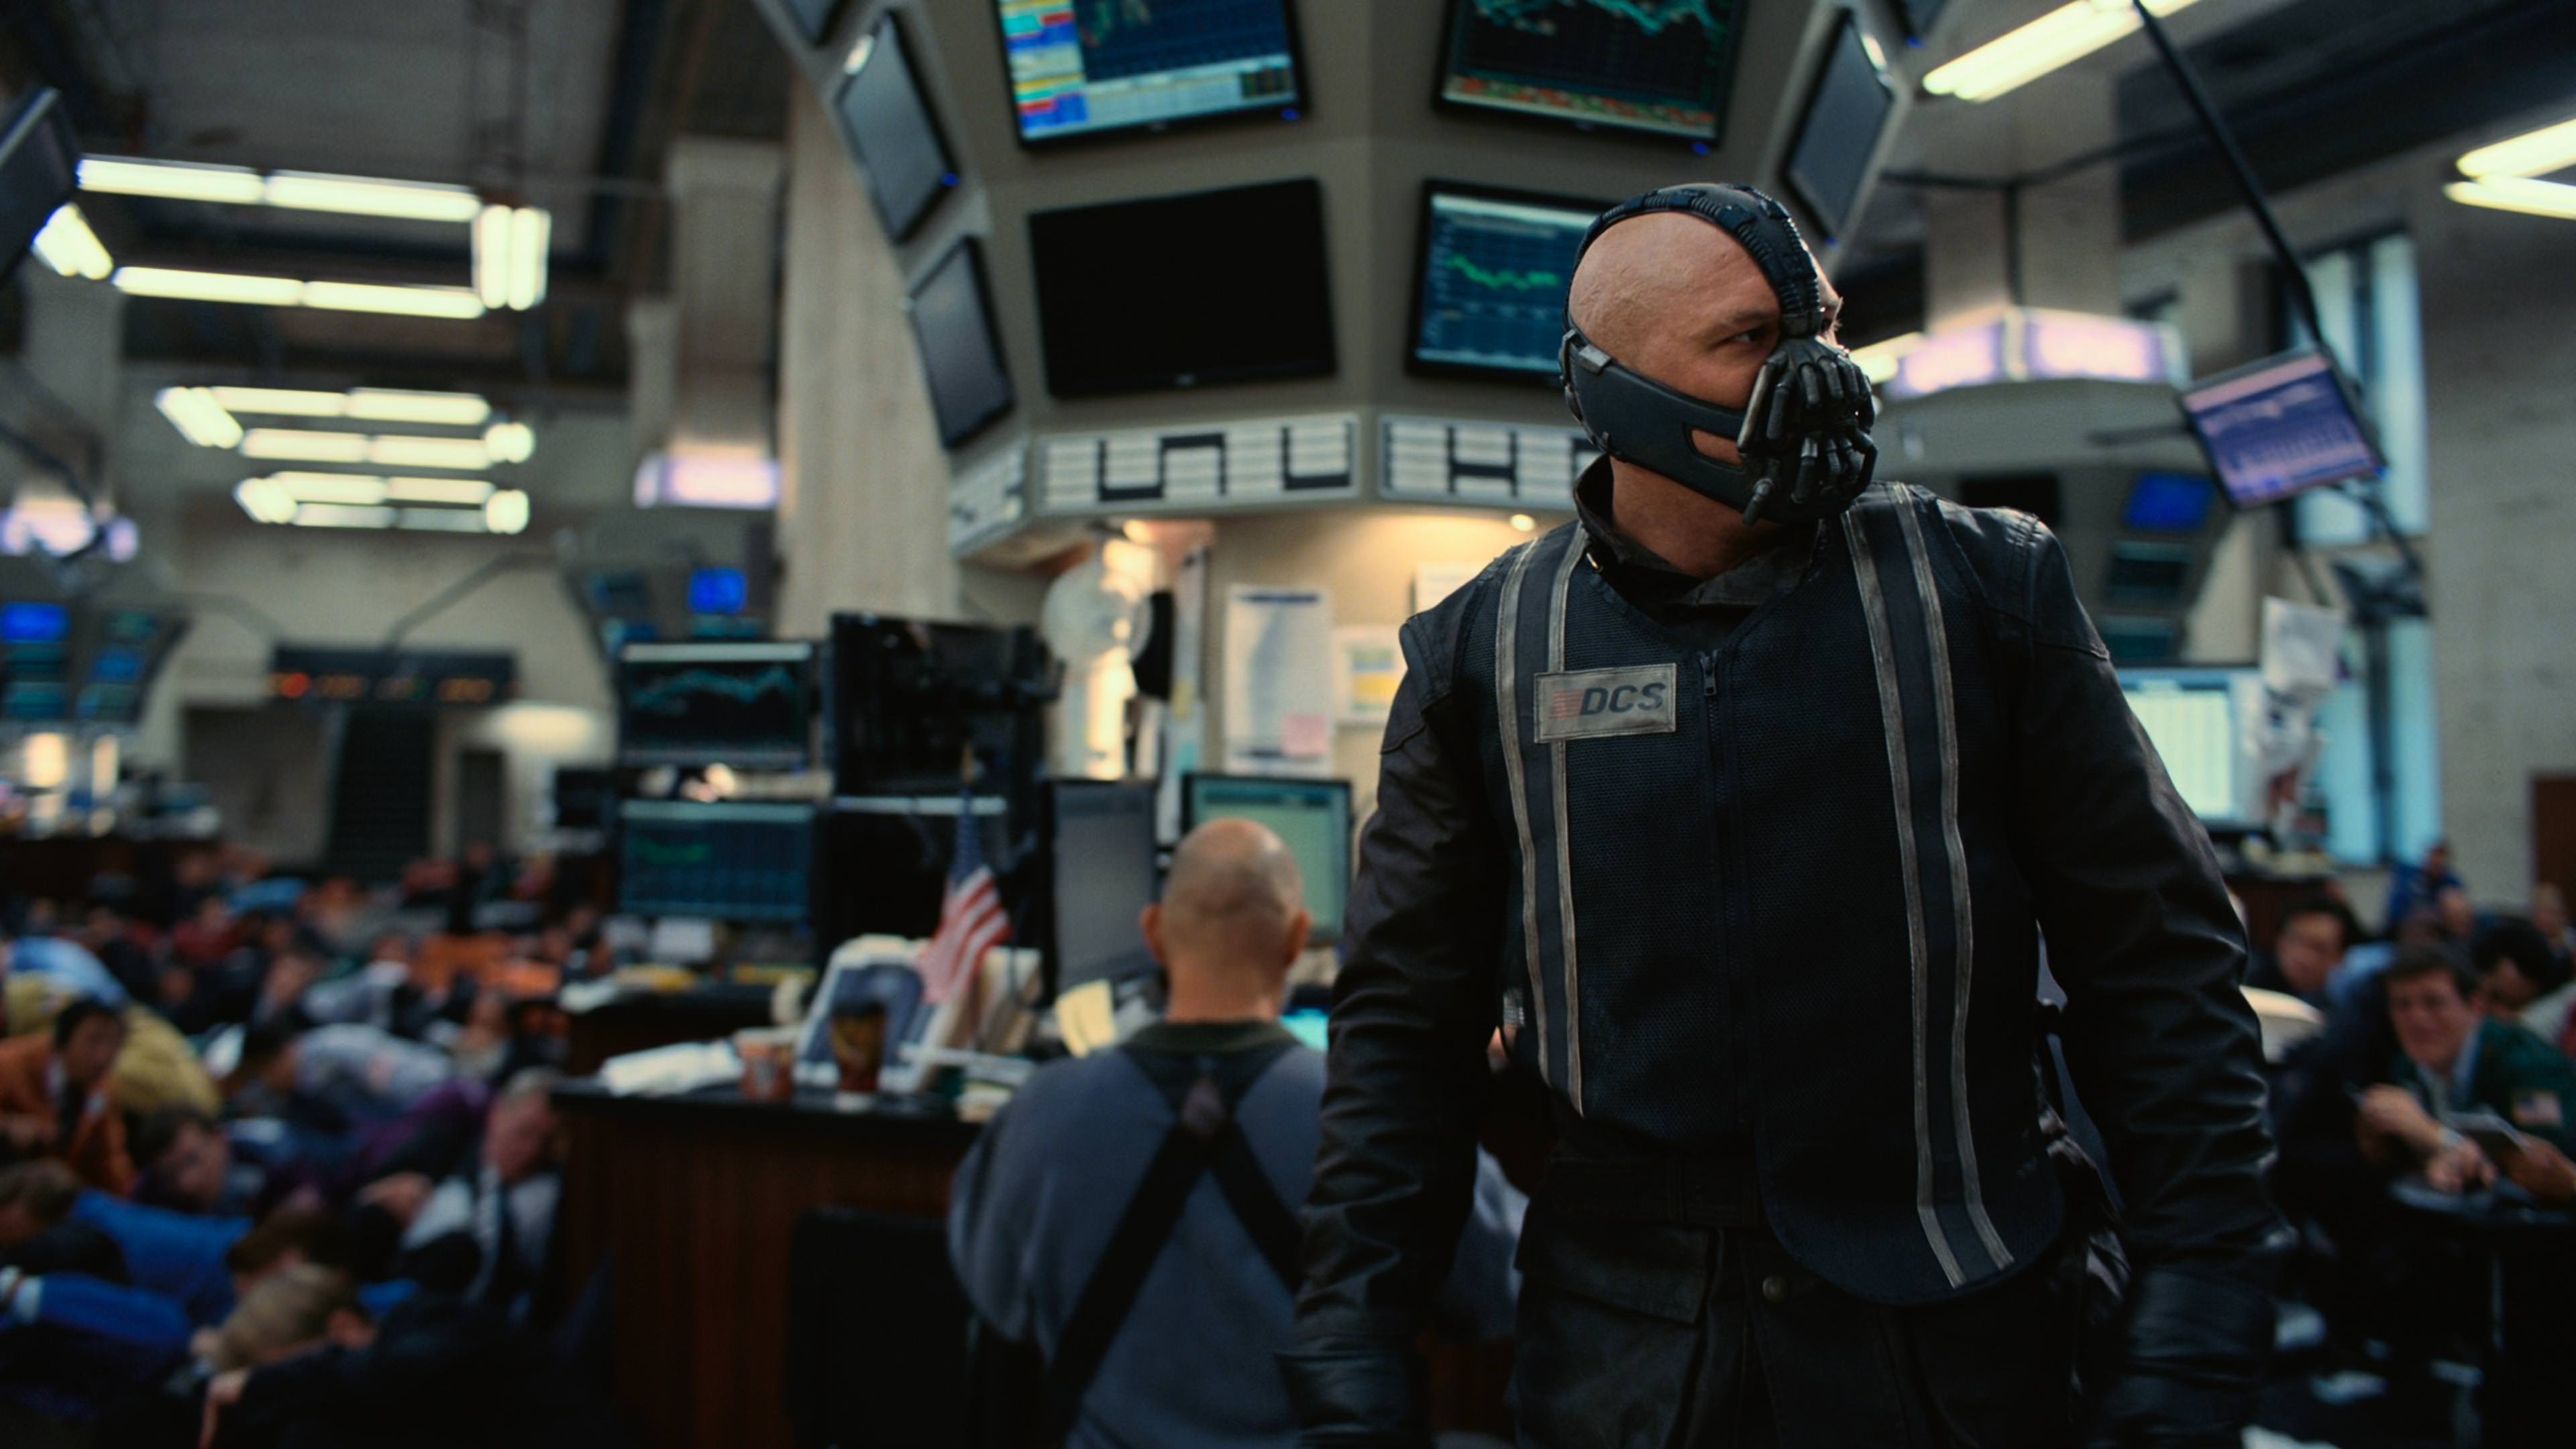 Attack on the Stock Exchange - The Dark Knight Rises 4K wallpaper